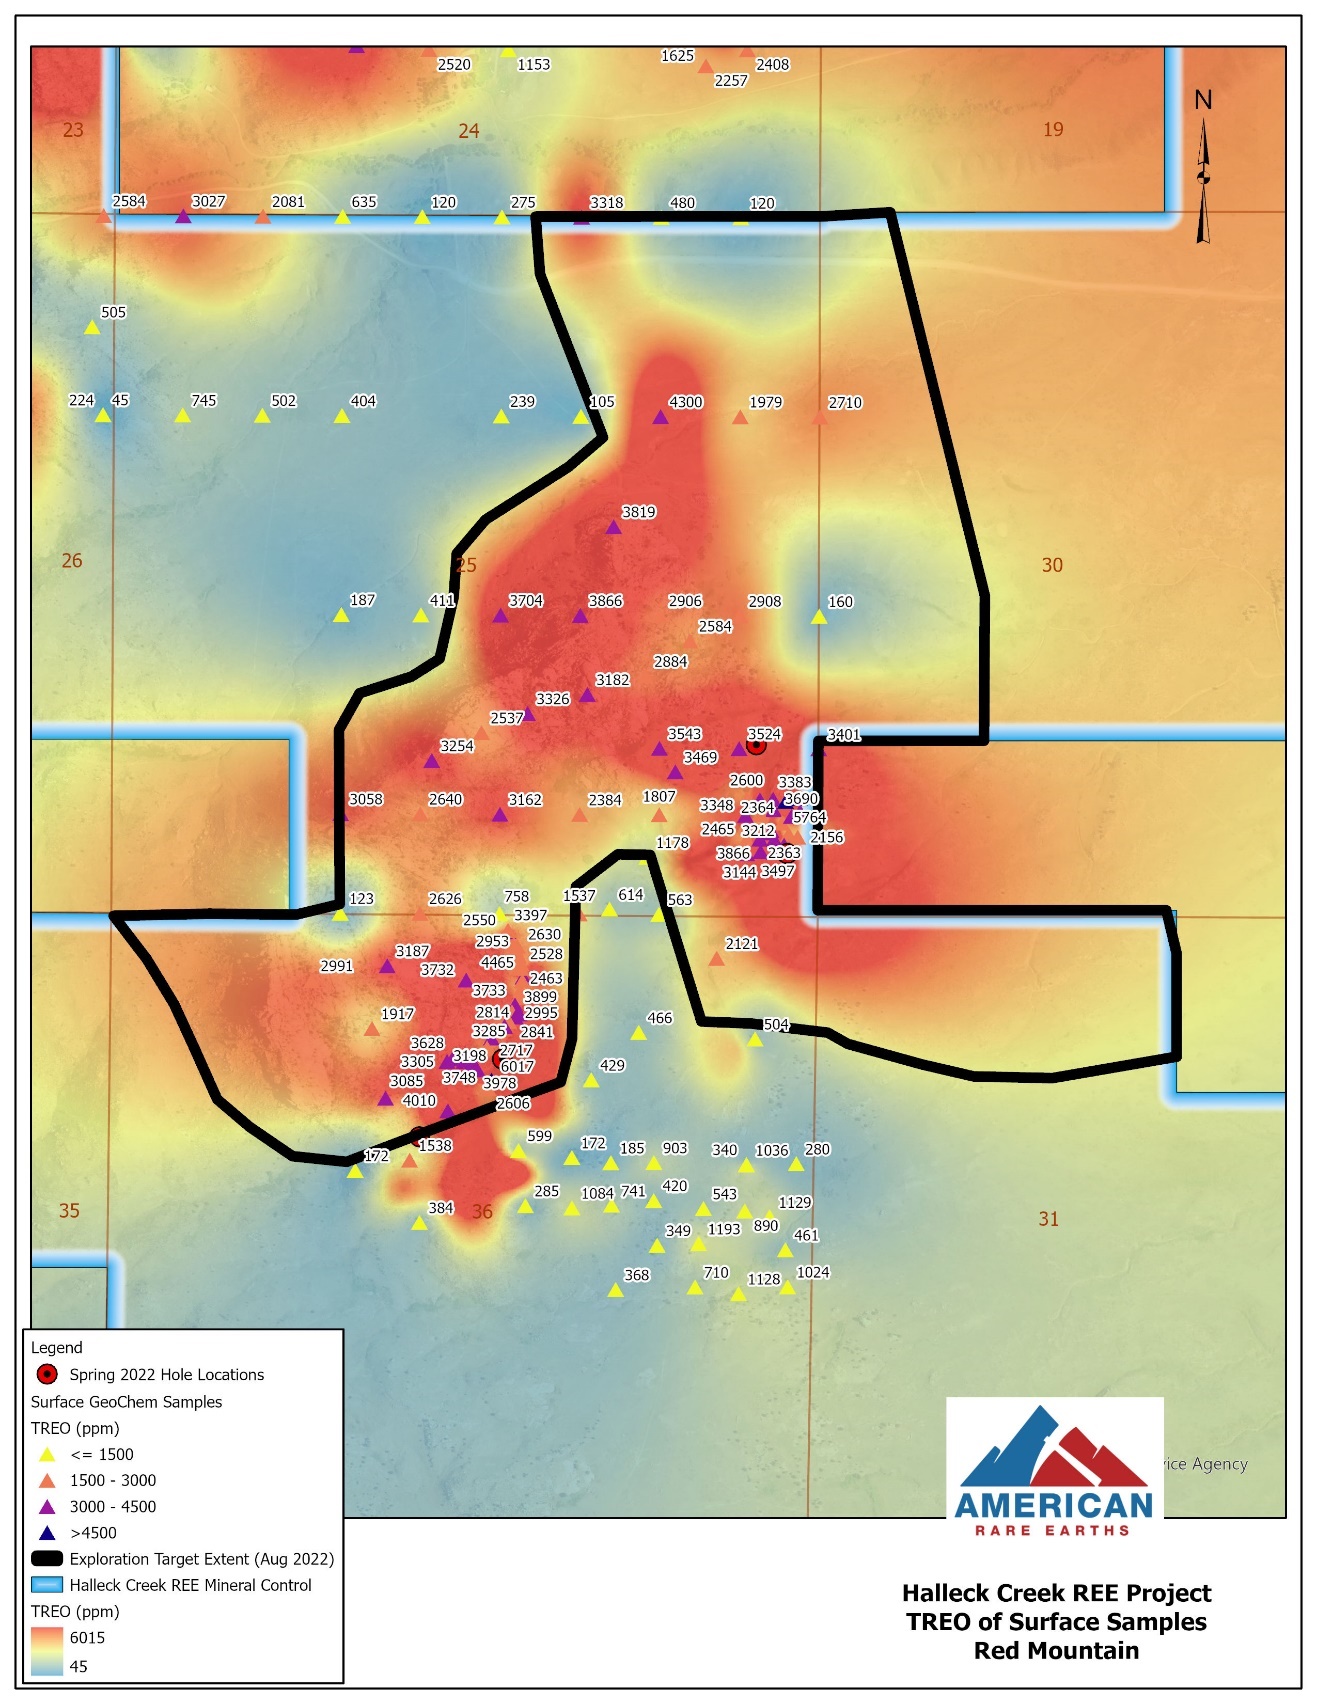 Red Mountain Exploration Target Extent and TREO Distribution